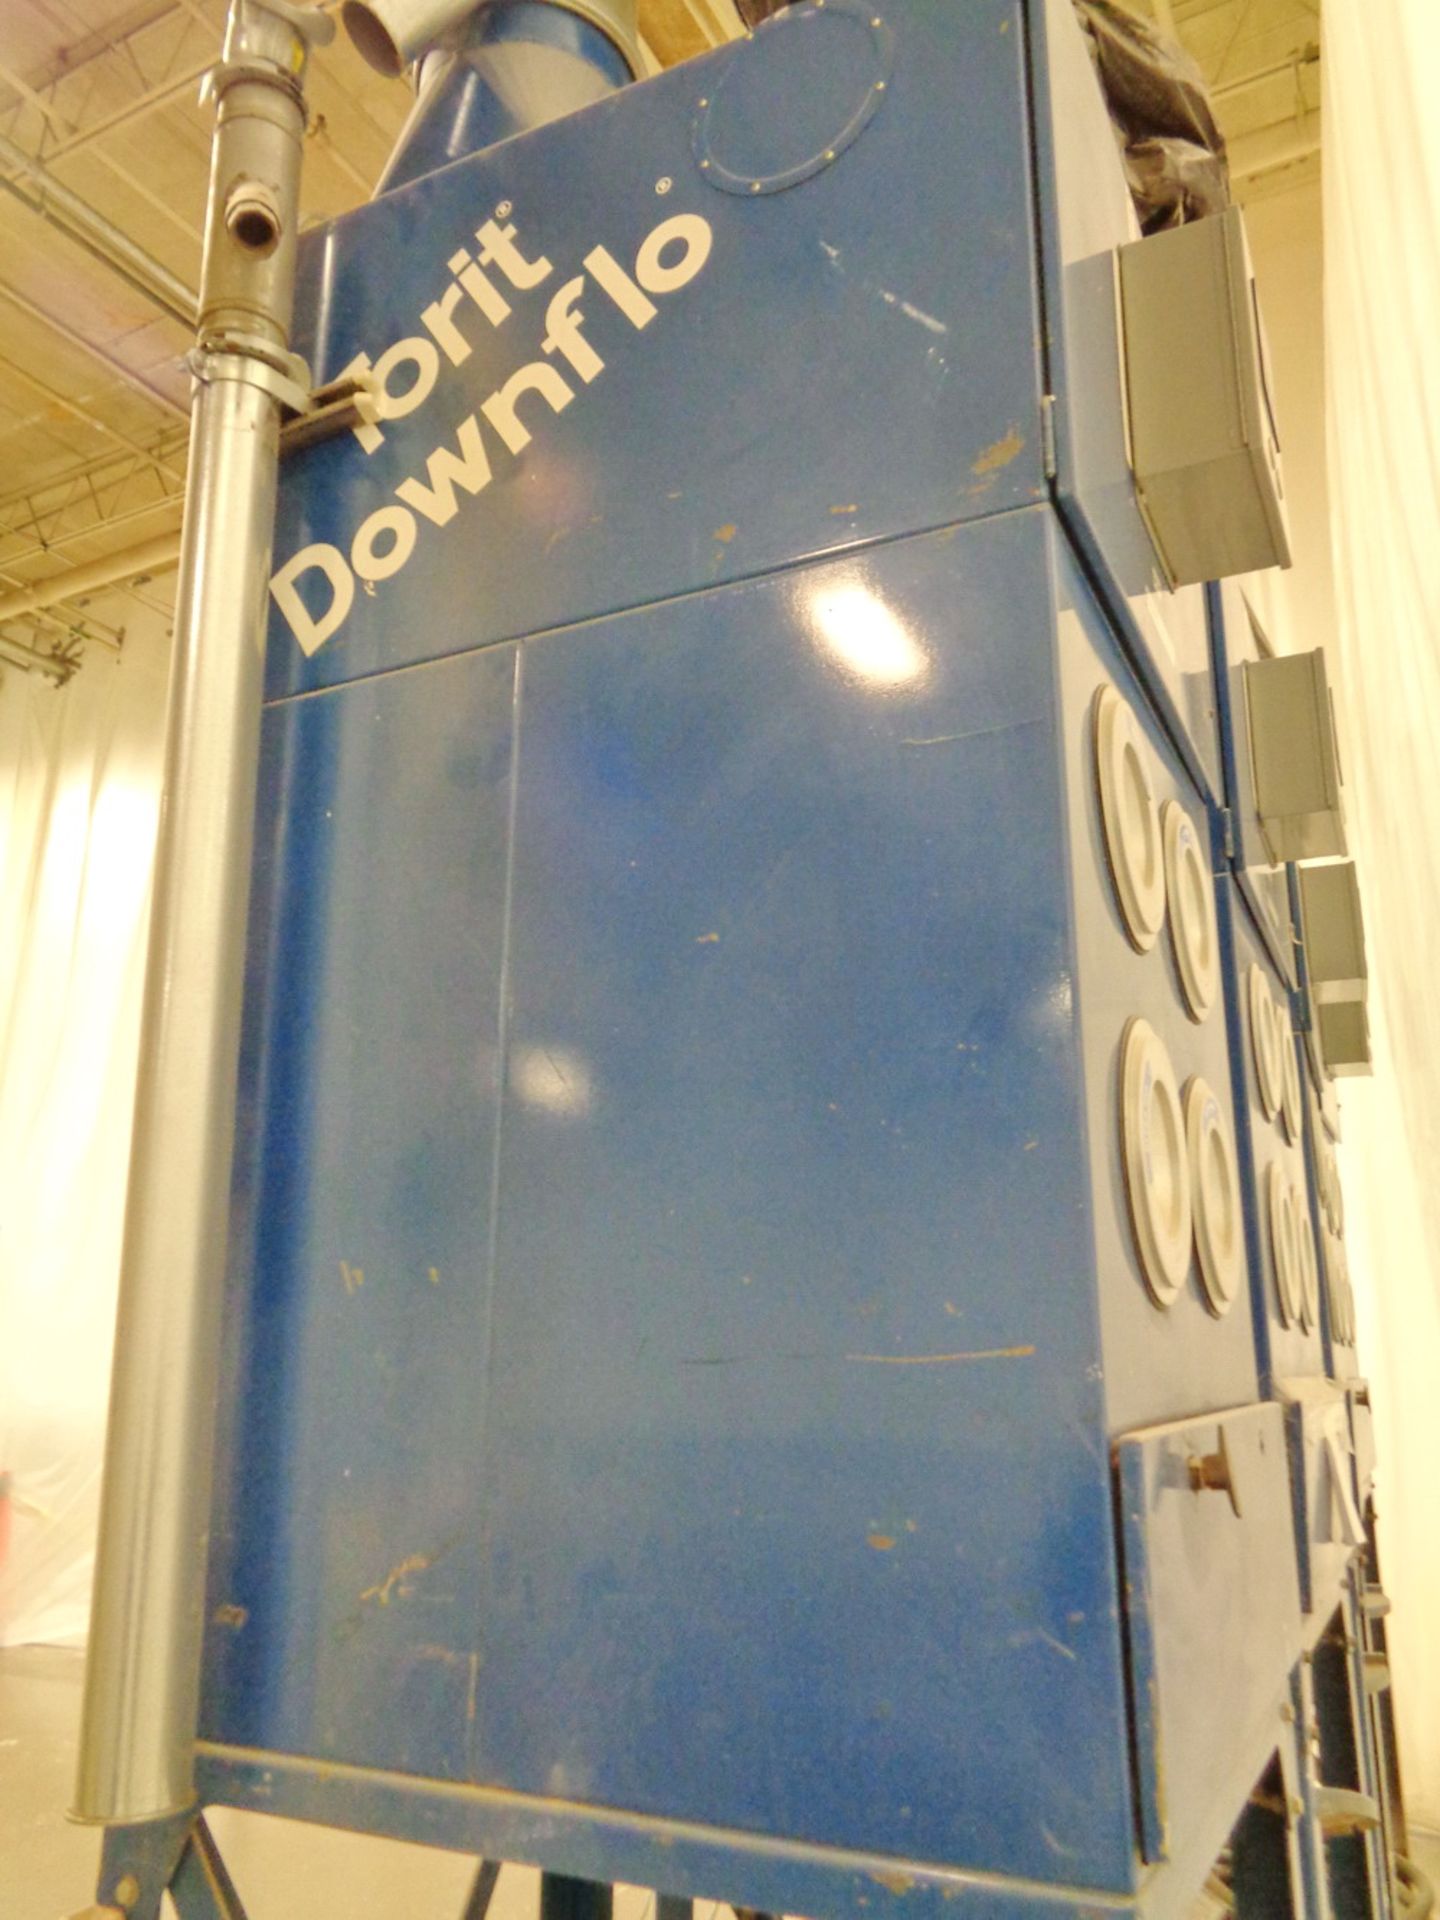 Torit Downflo Cartridge Dust Collector, Model SDF-4 - Image 3 of 11